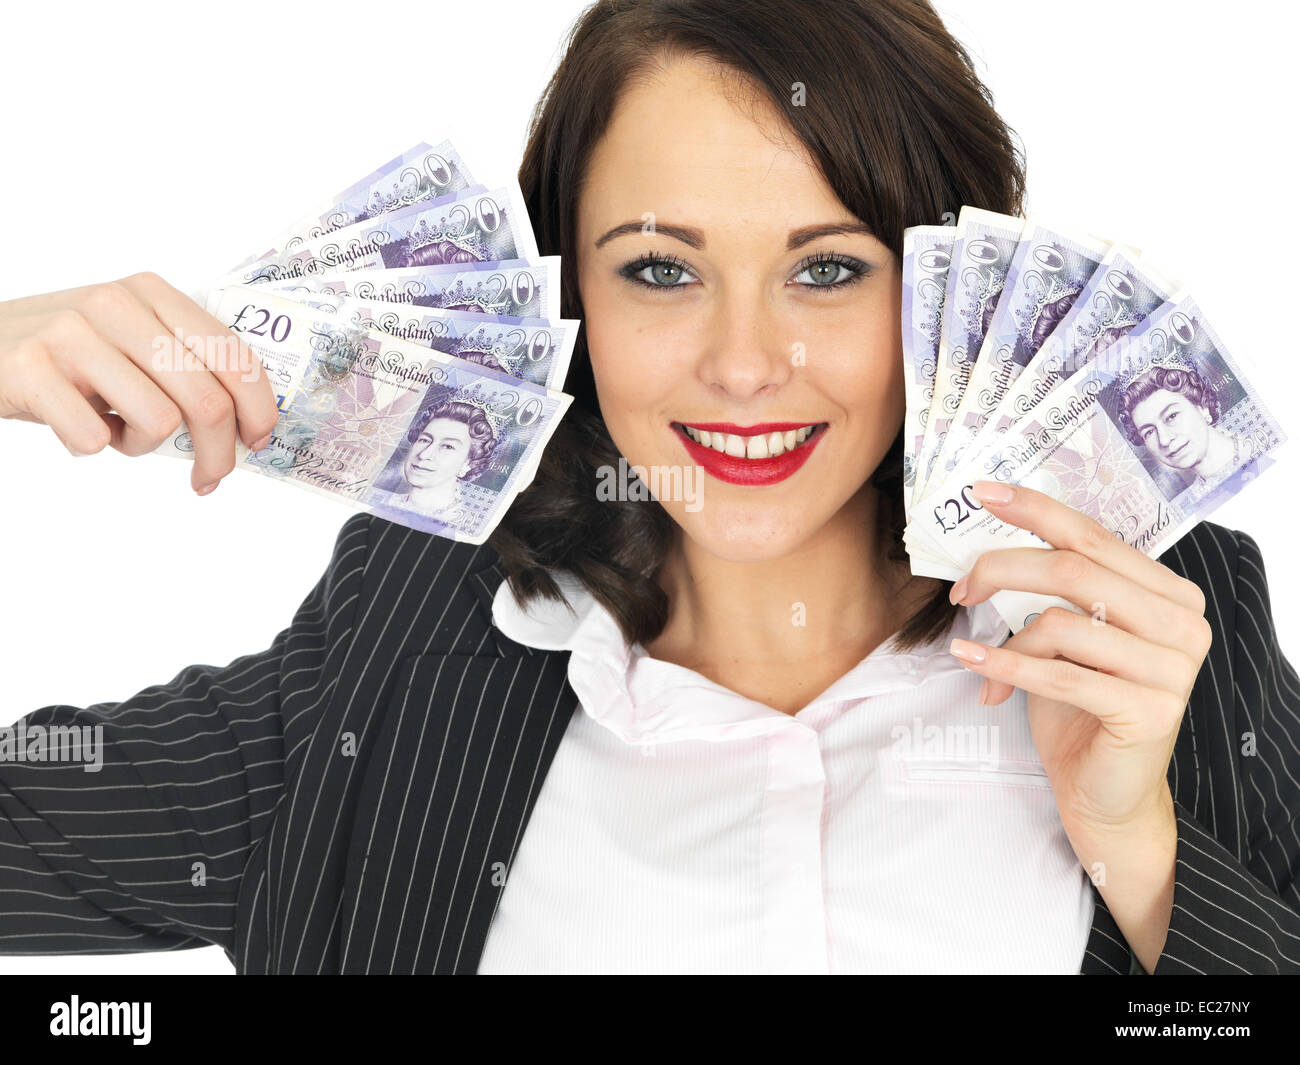 Successful Young Woman Excited Happy And Confident Celebrating Holding A Handful Of Money Isolated Against A White Background With A Clipping Path Stock Photo